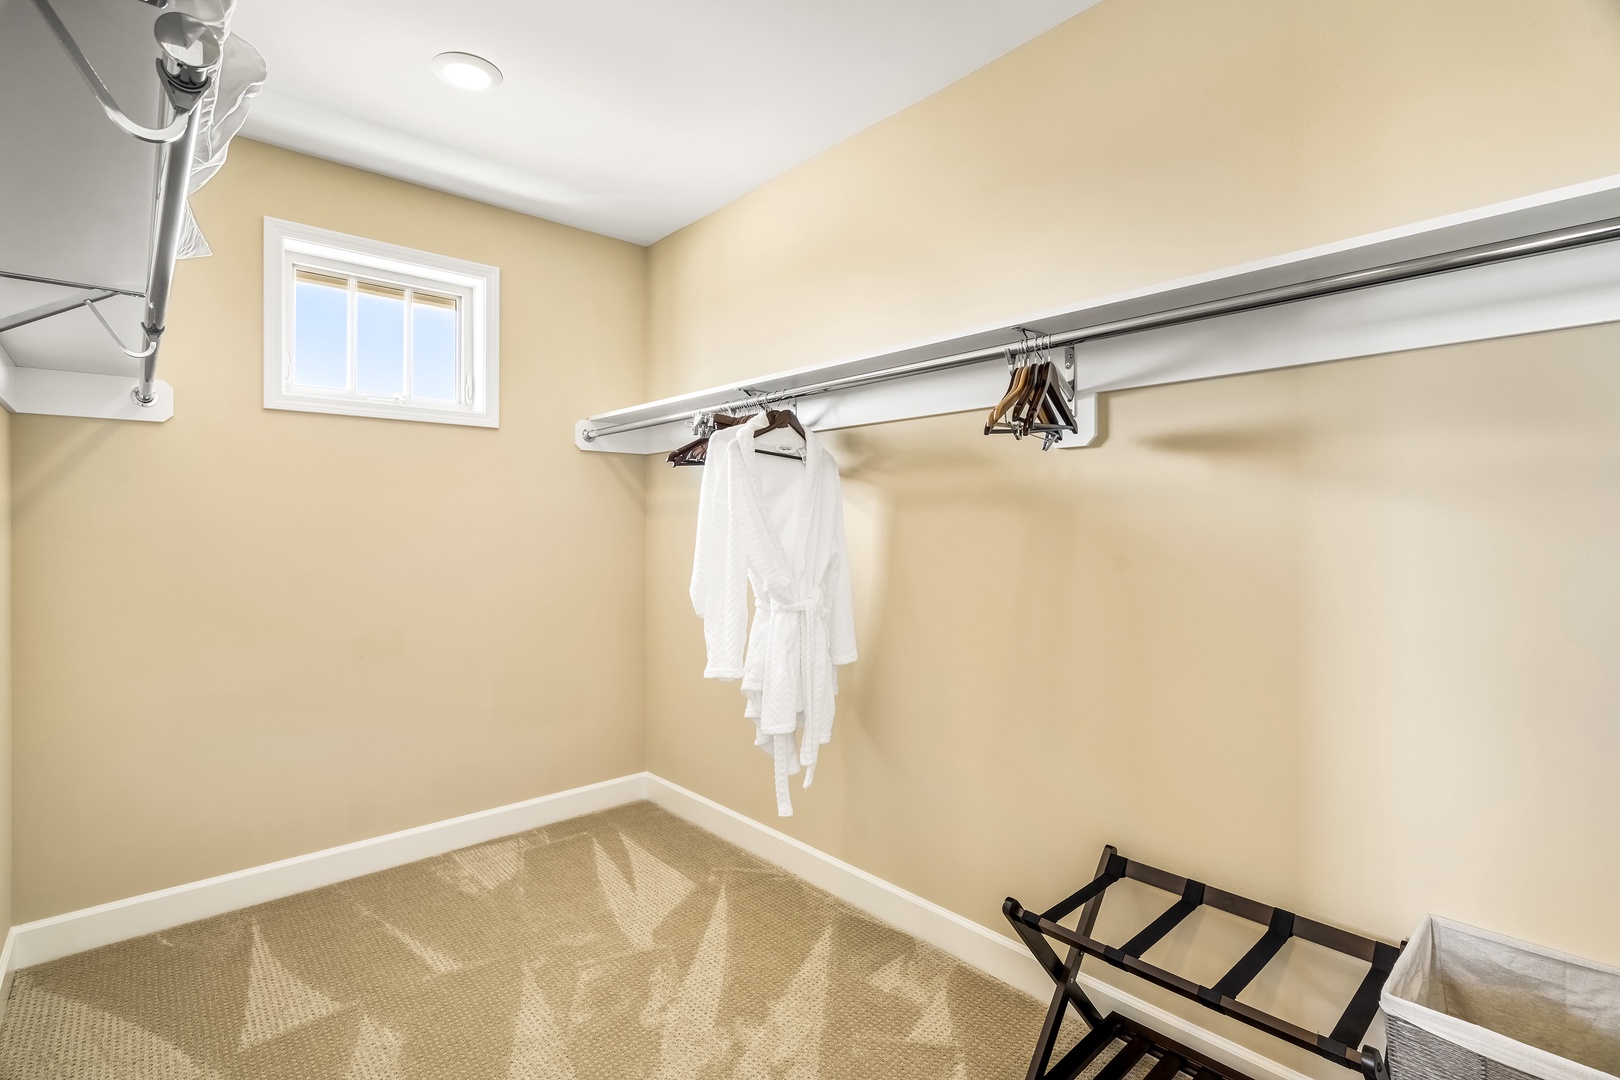 Kailua Kona Vacation Rentals, Golf Green - Primary bedroom closet with robes!